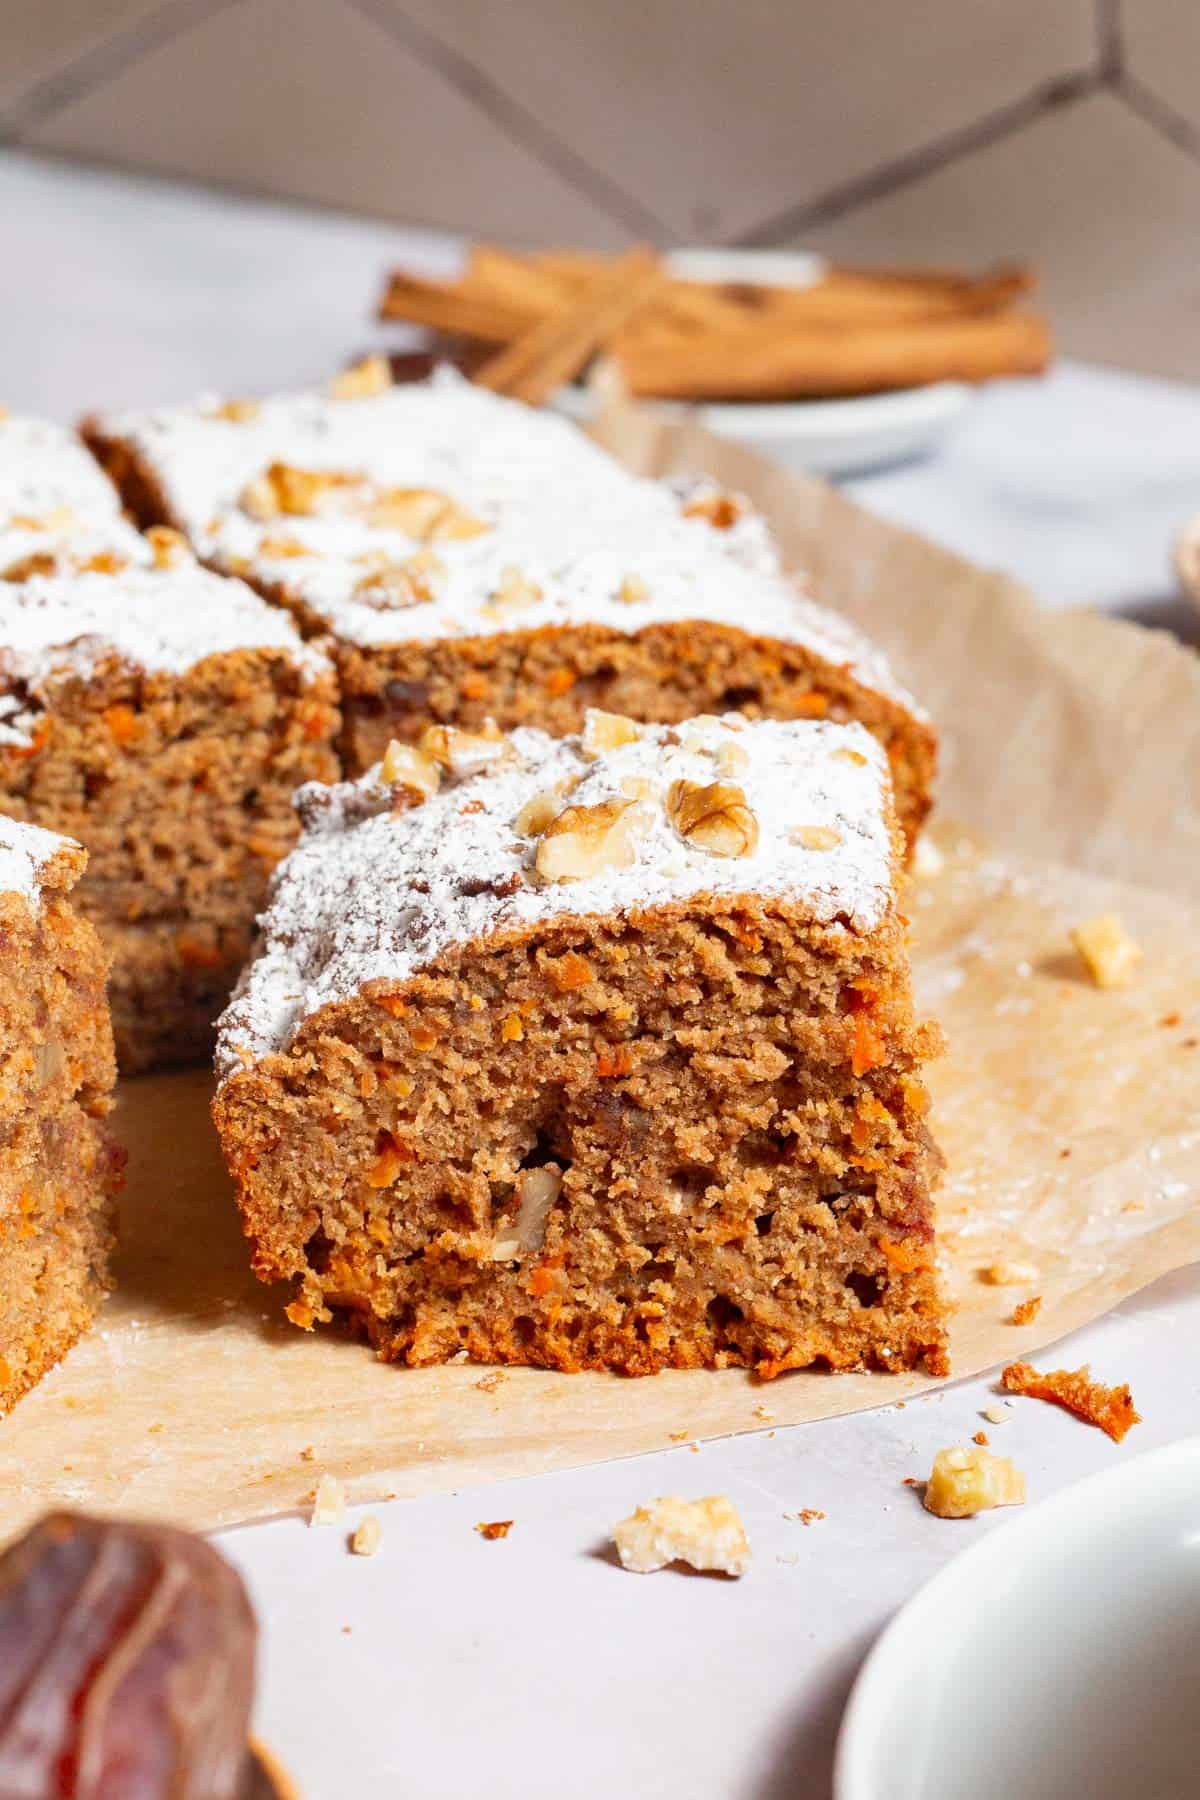 A close up of a slice of the healthy carrot cake in front of the rest of the cake on a sheet of parchment paper.